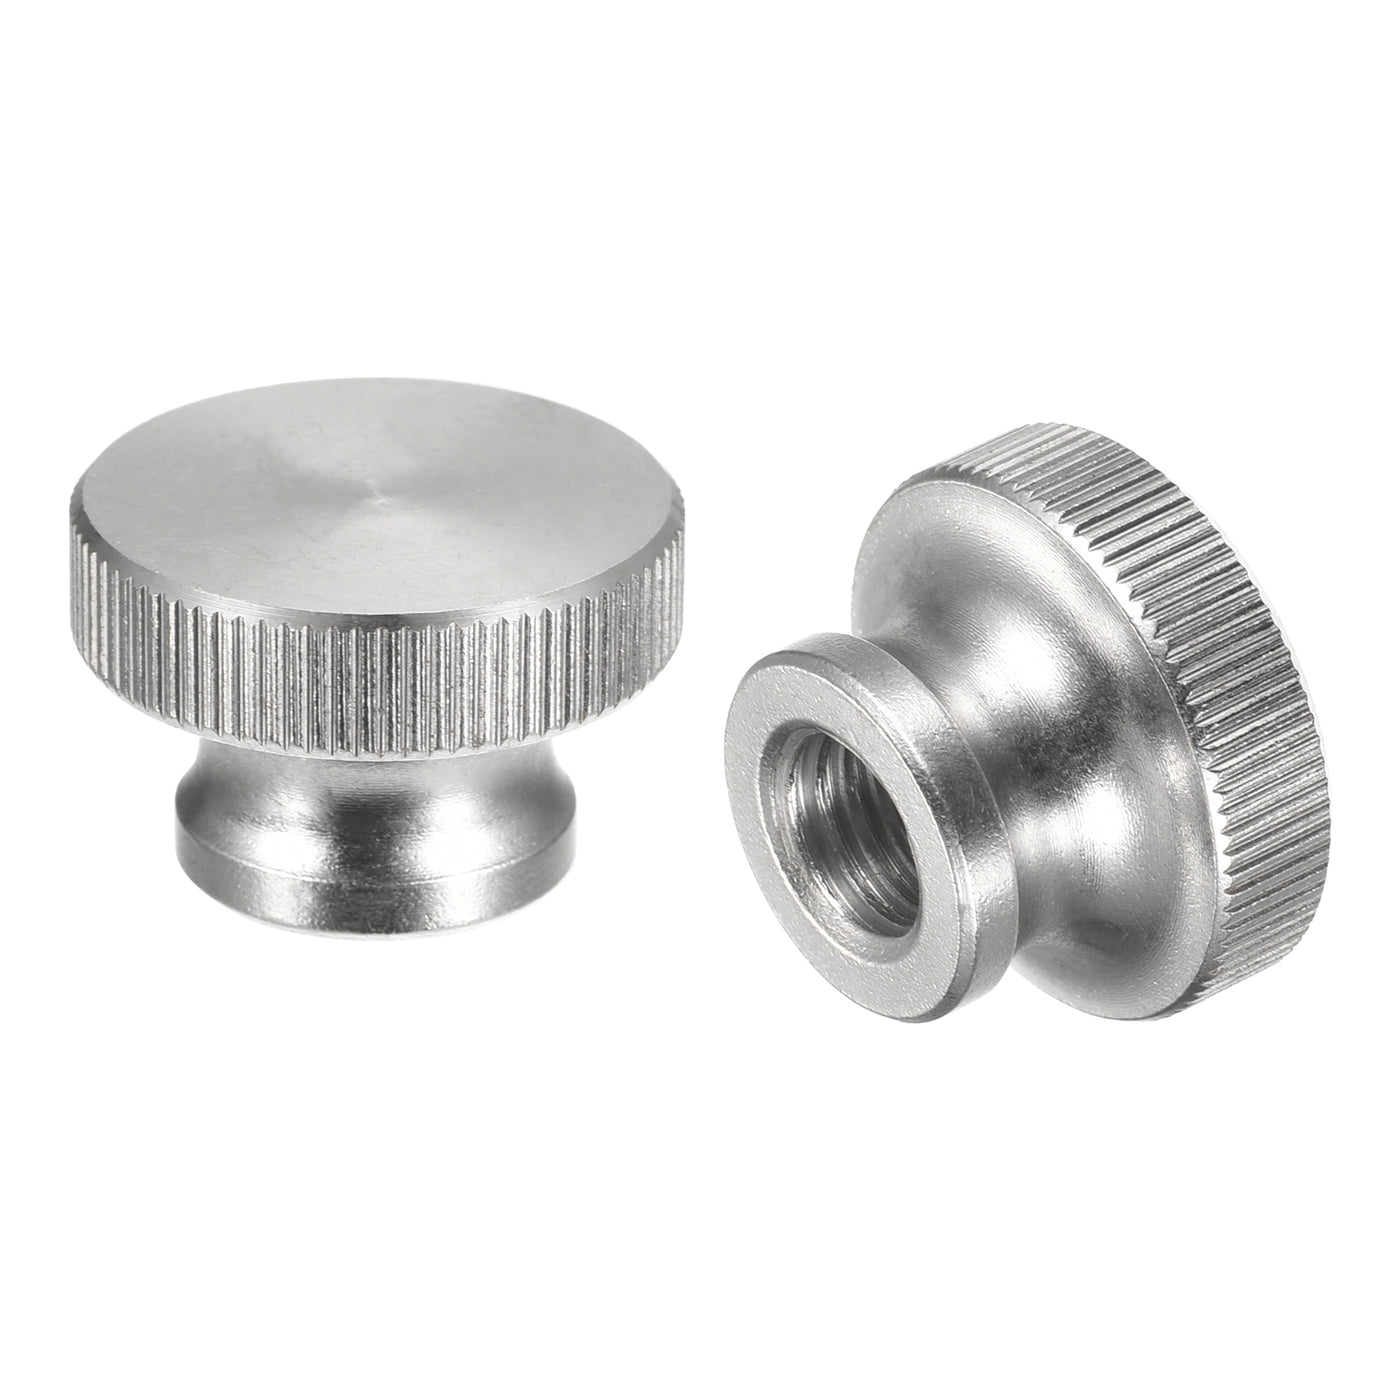 uxcell Uxcell Knurled Thumb Nuts, 4pcs M12 x D30mm x H20mm 304 Stainless Steel Blind Hole Nuts